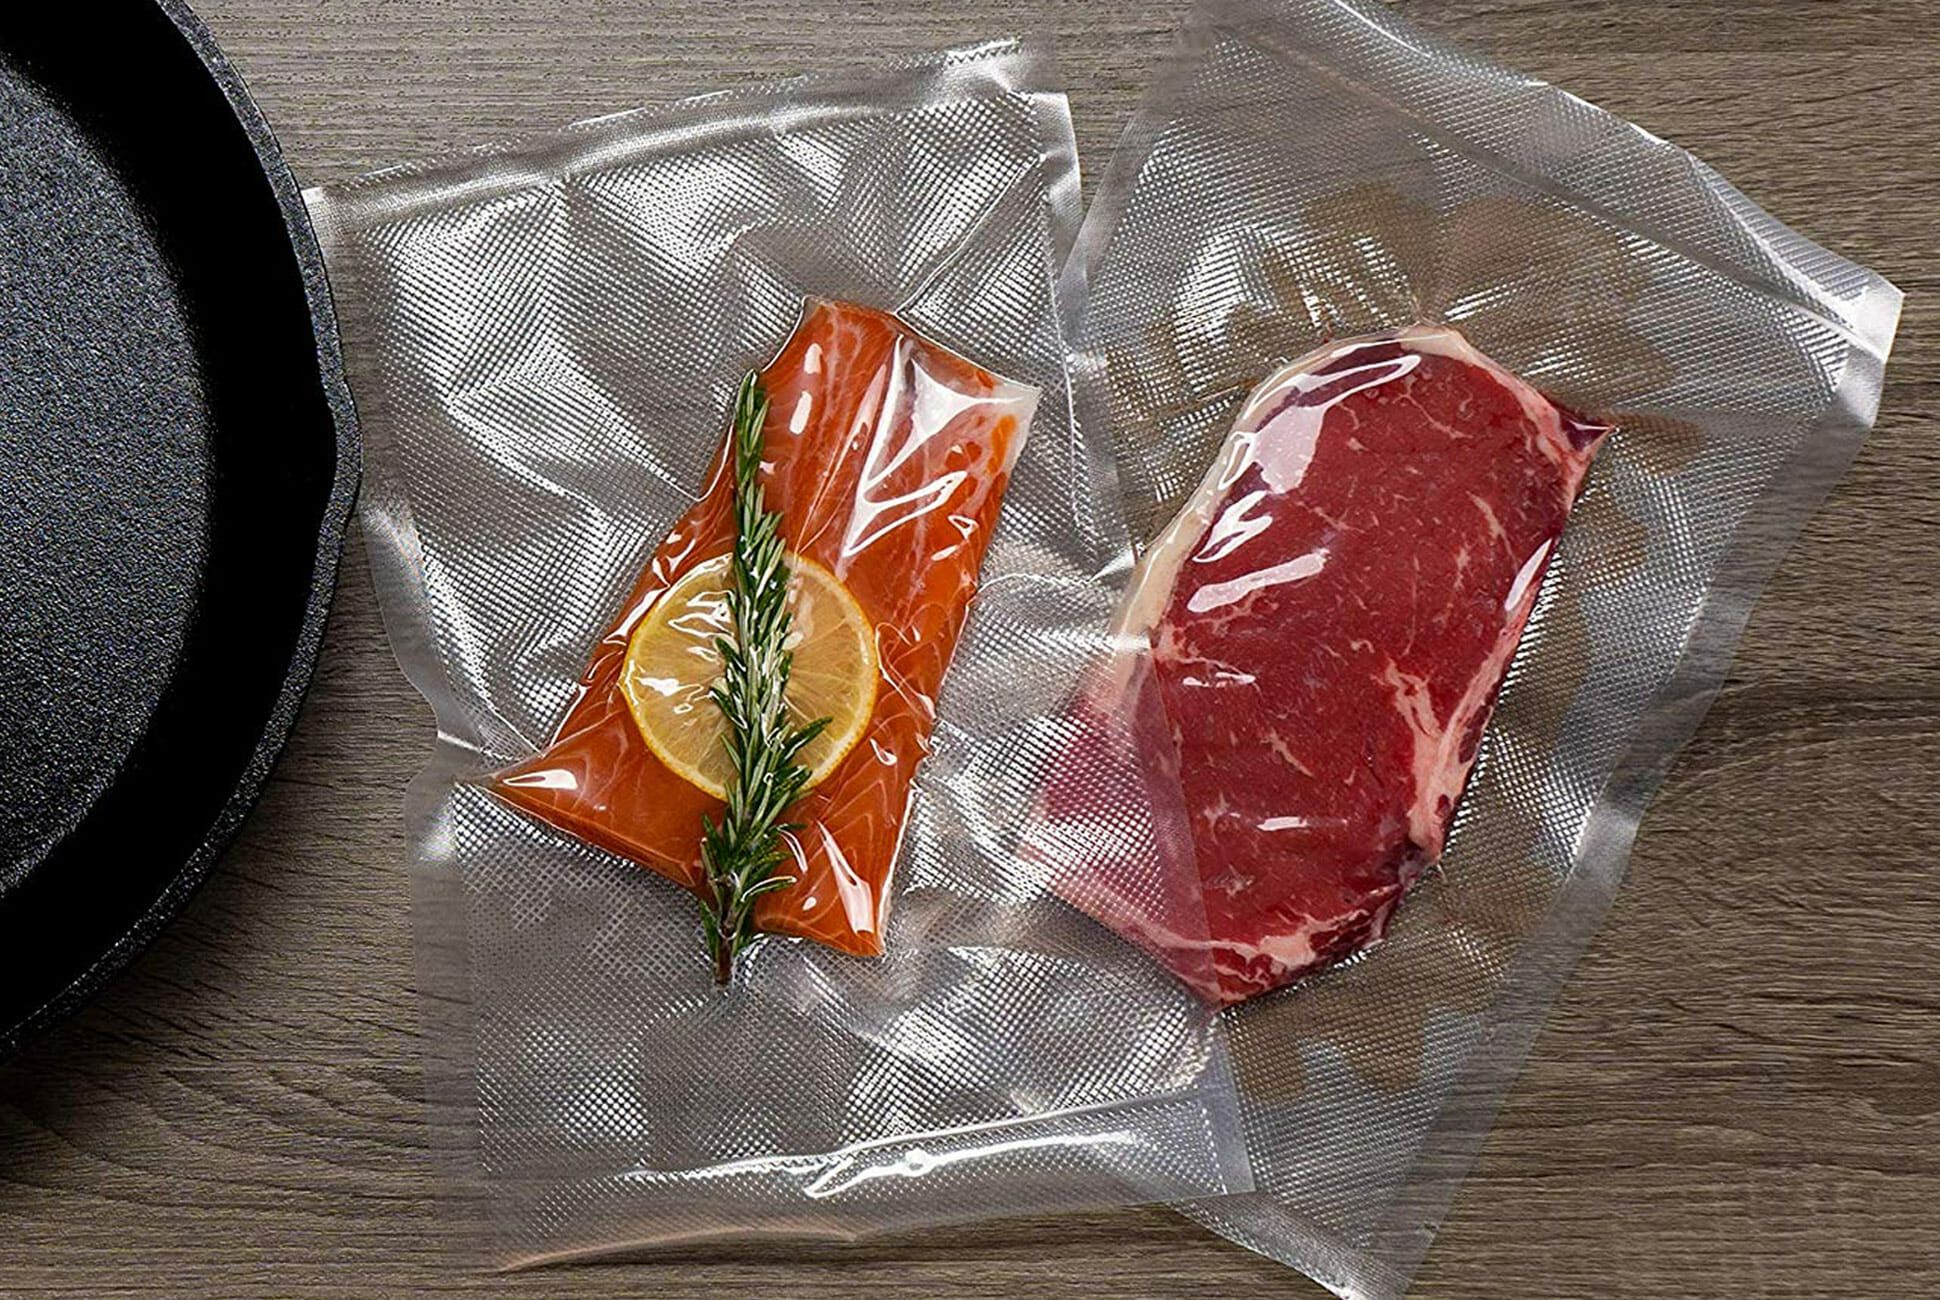 How to Prevent Sous Vide Bags From Floating